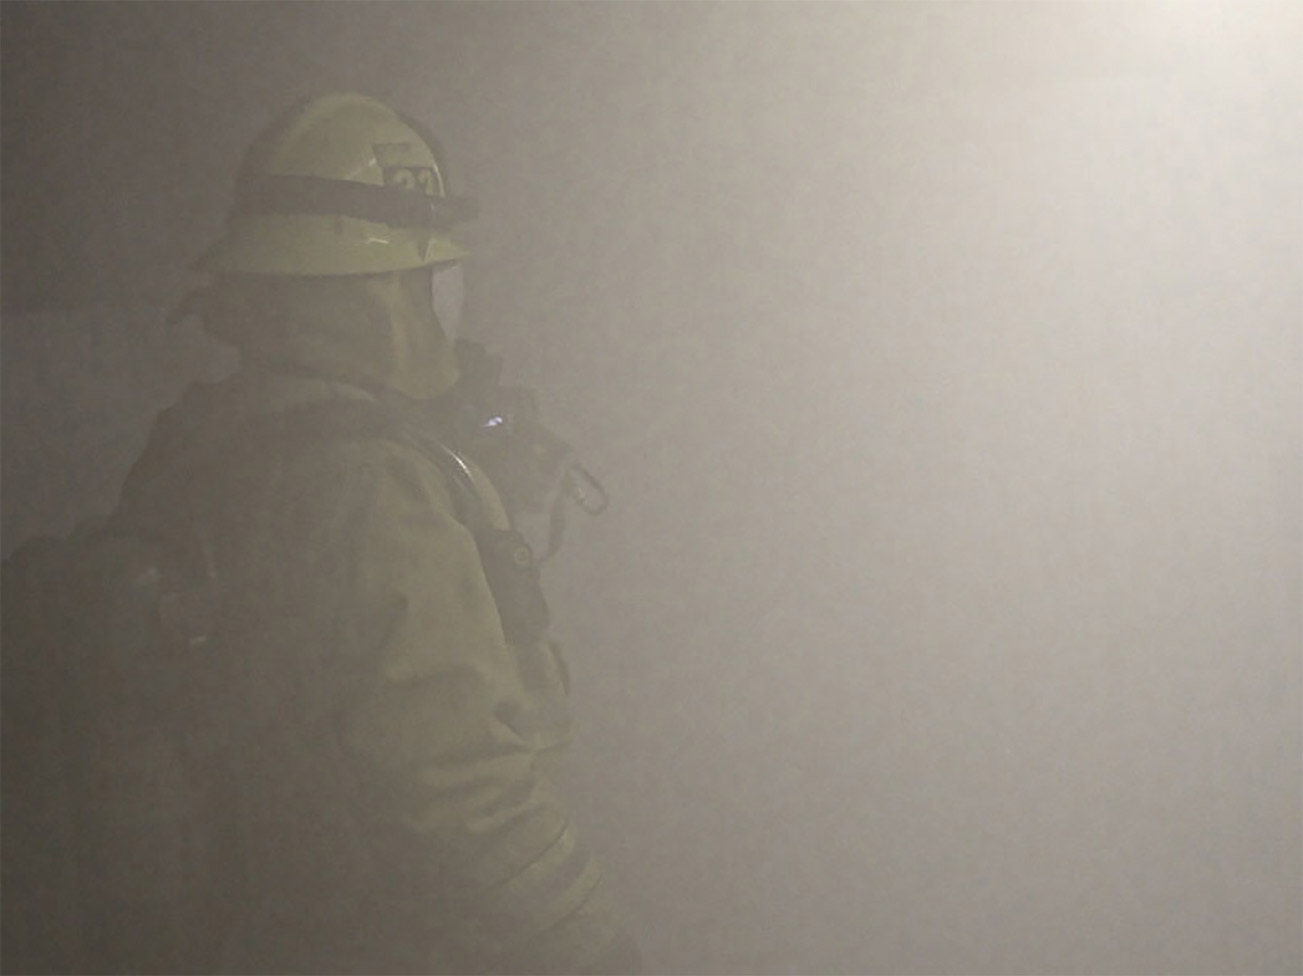 A firefighter stands in smoke